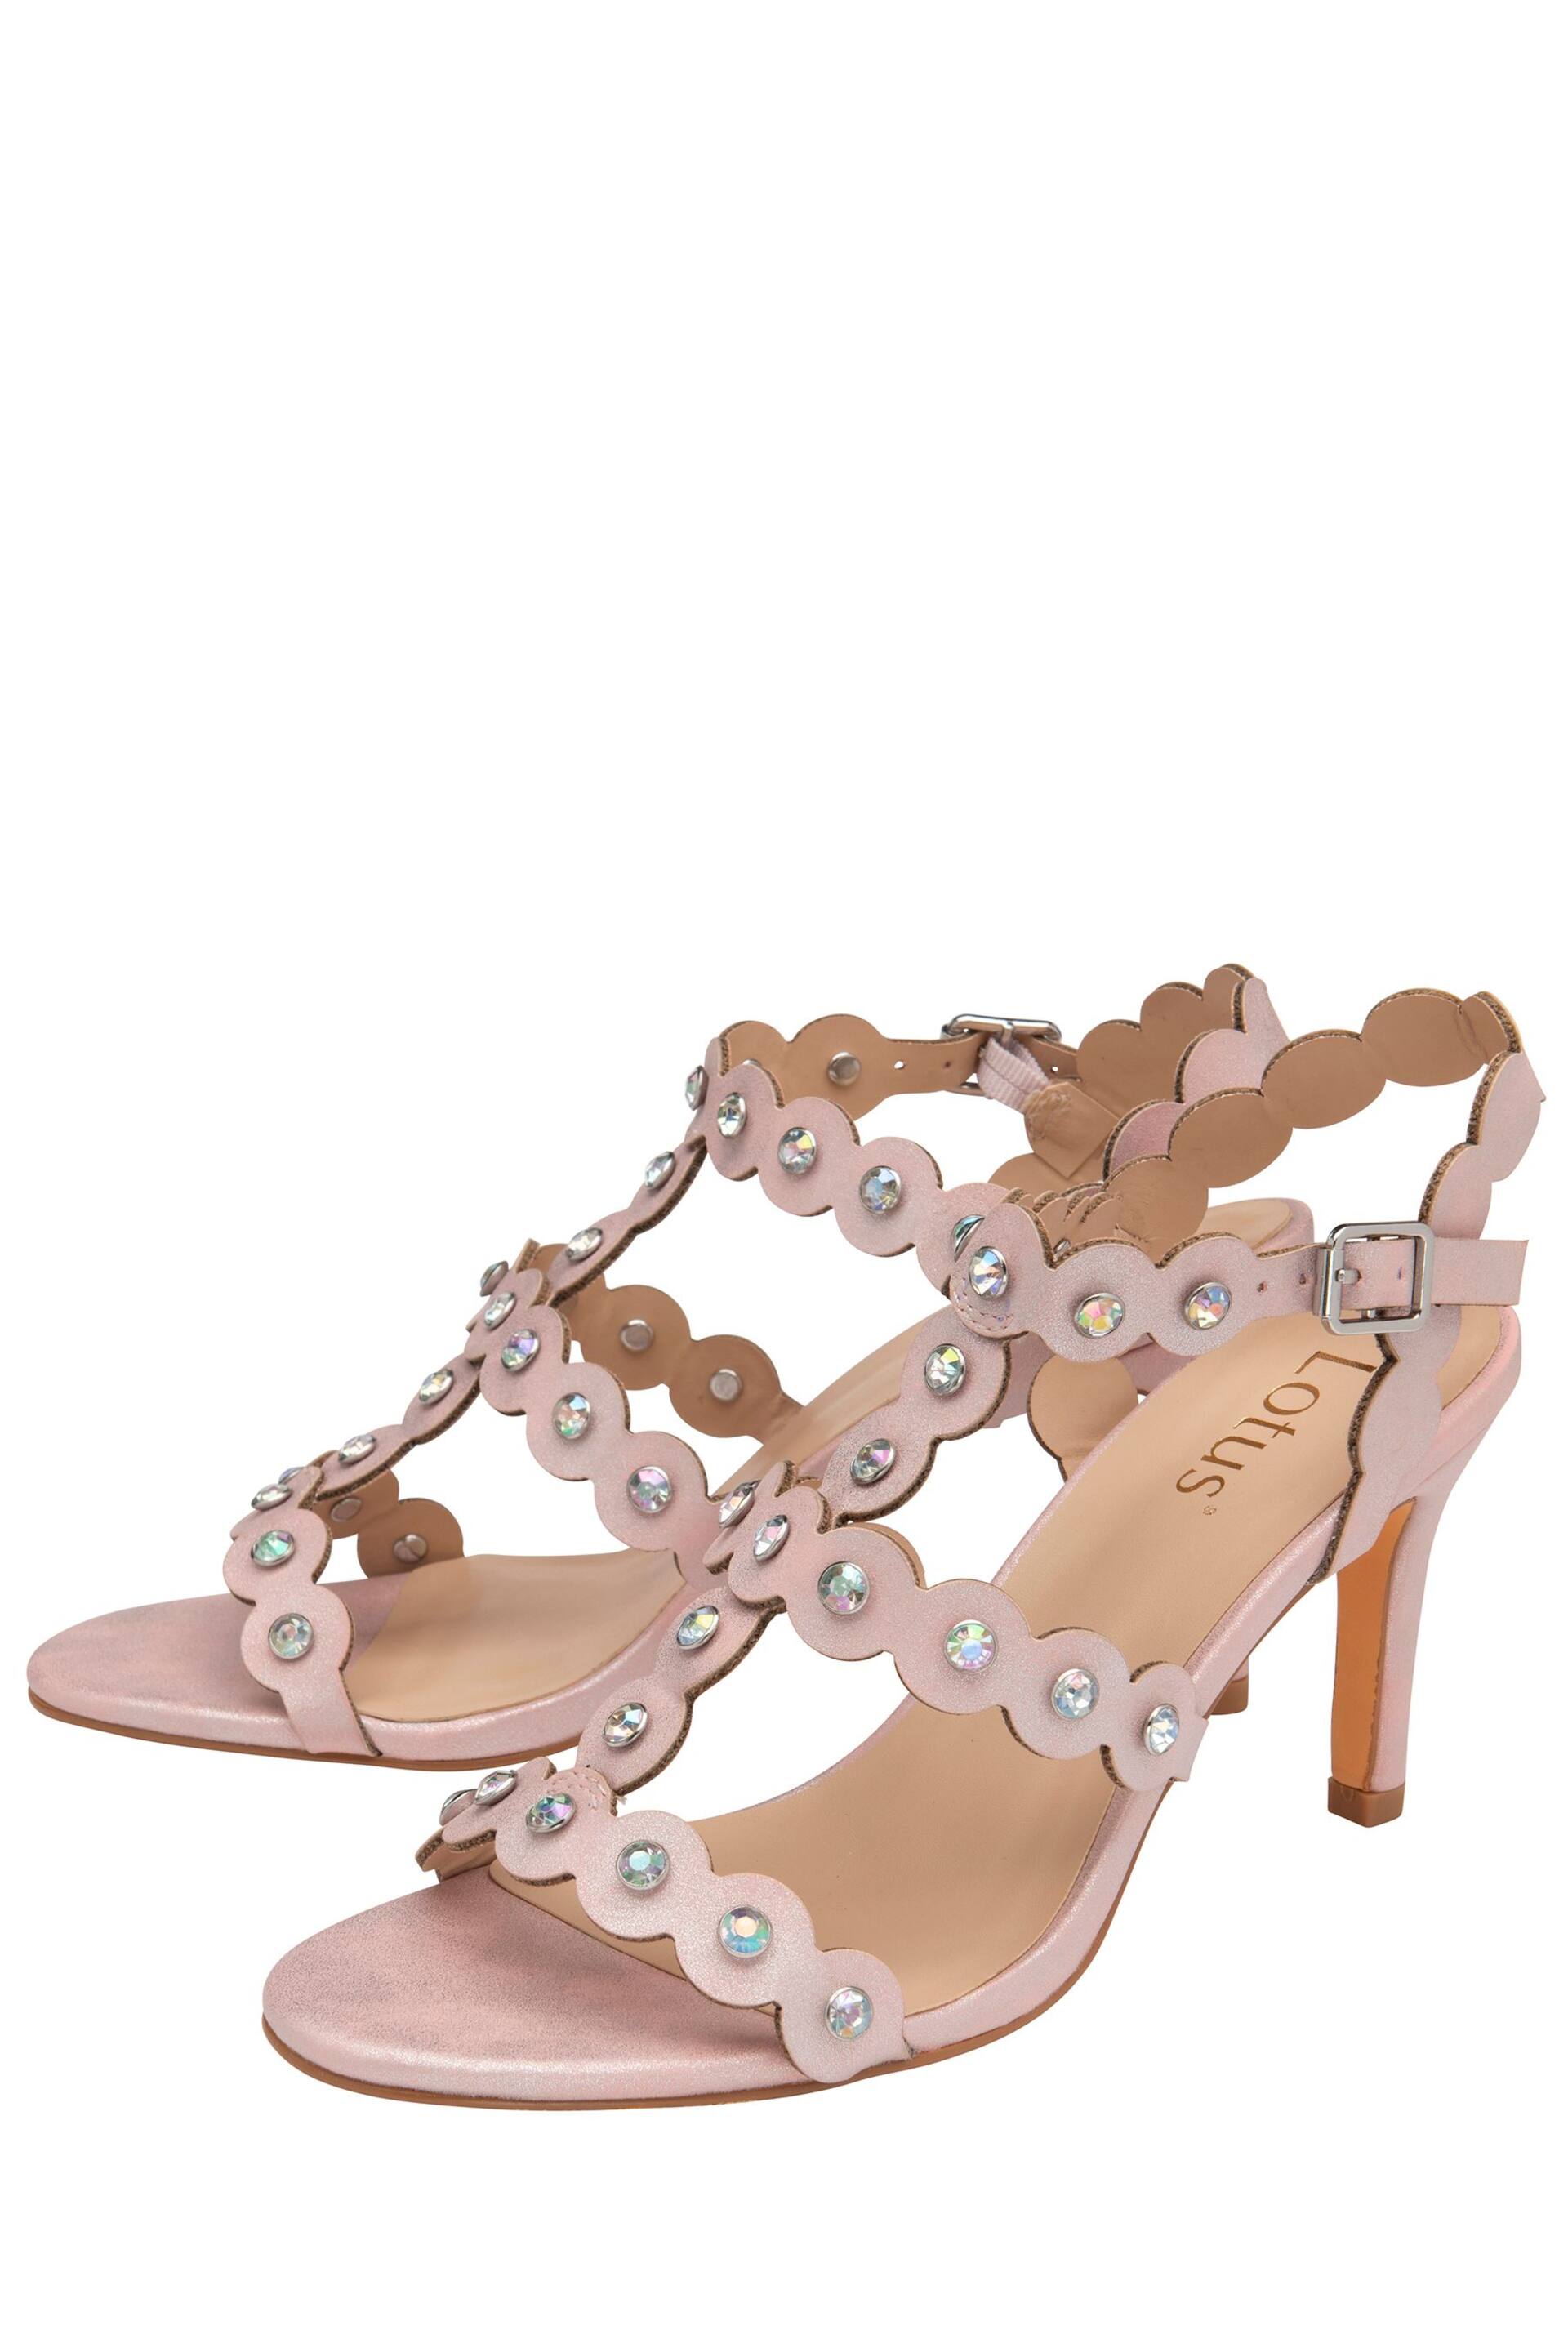 Lotus Pink Open-Toe Sandals - Image 2 of 4